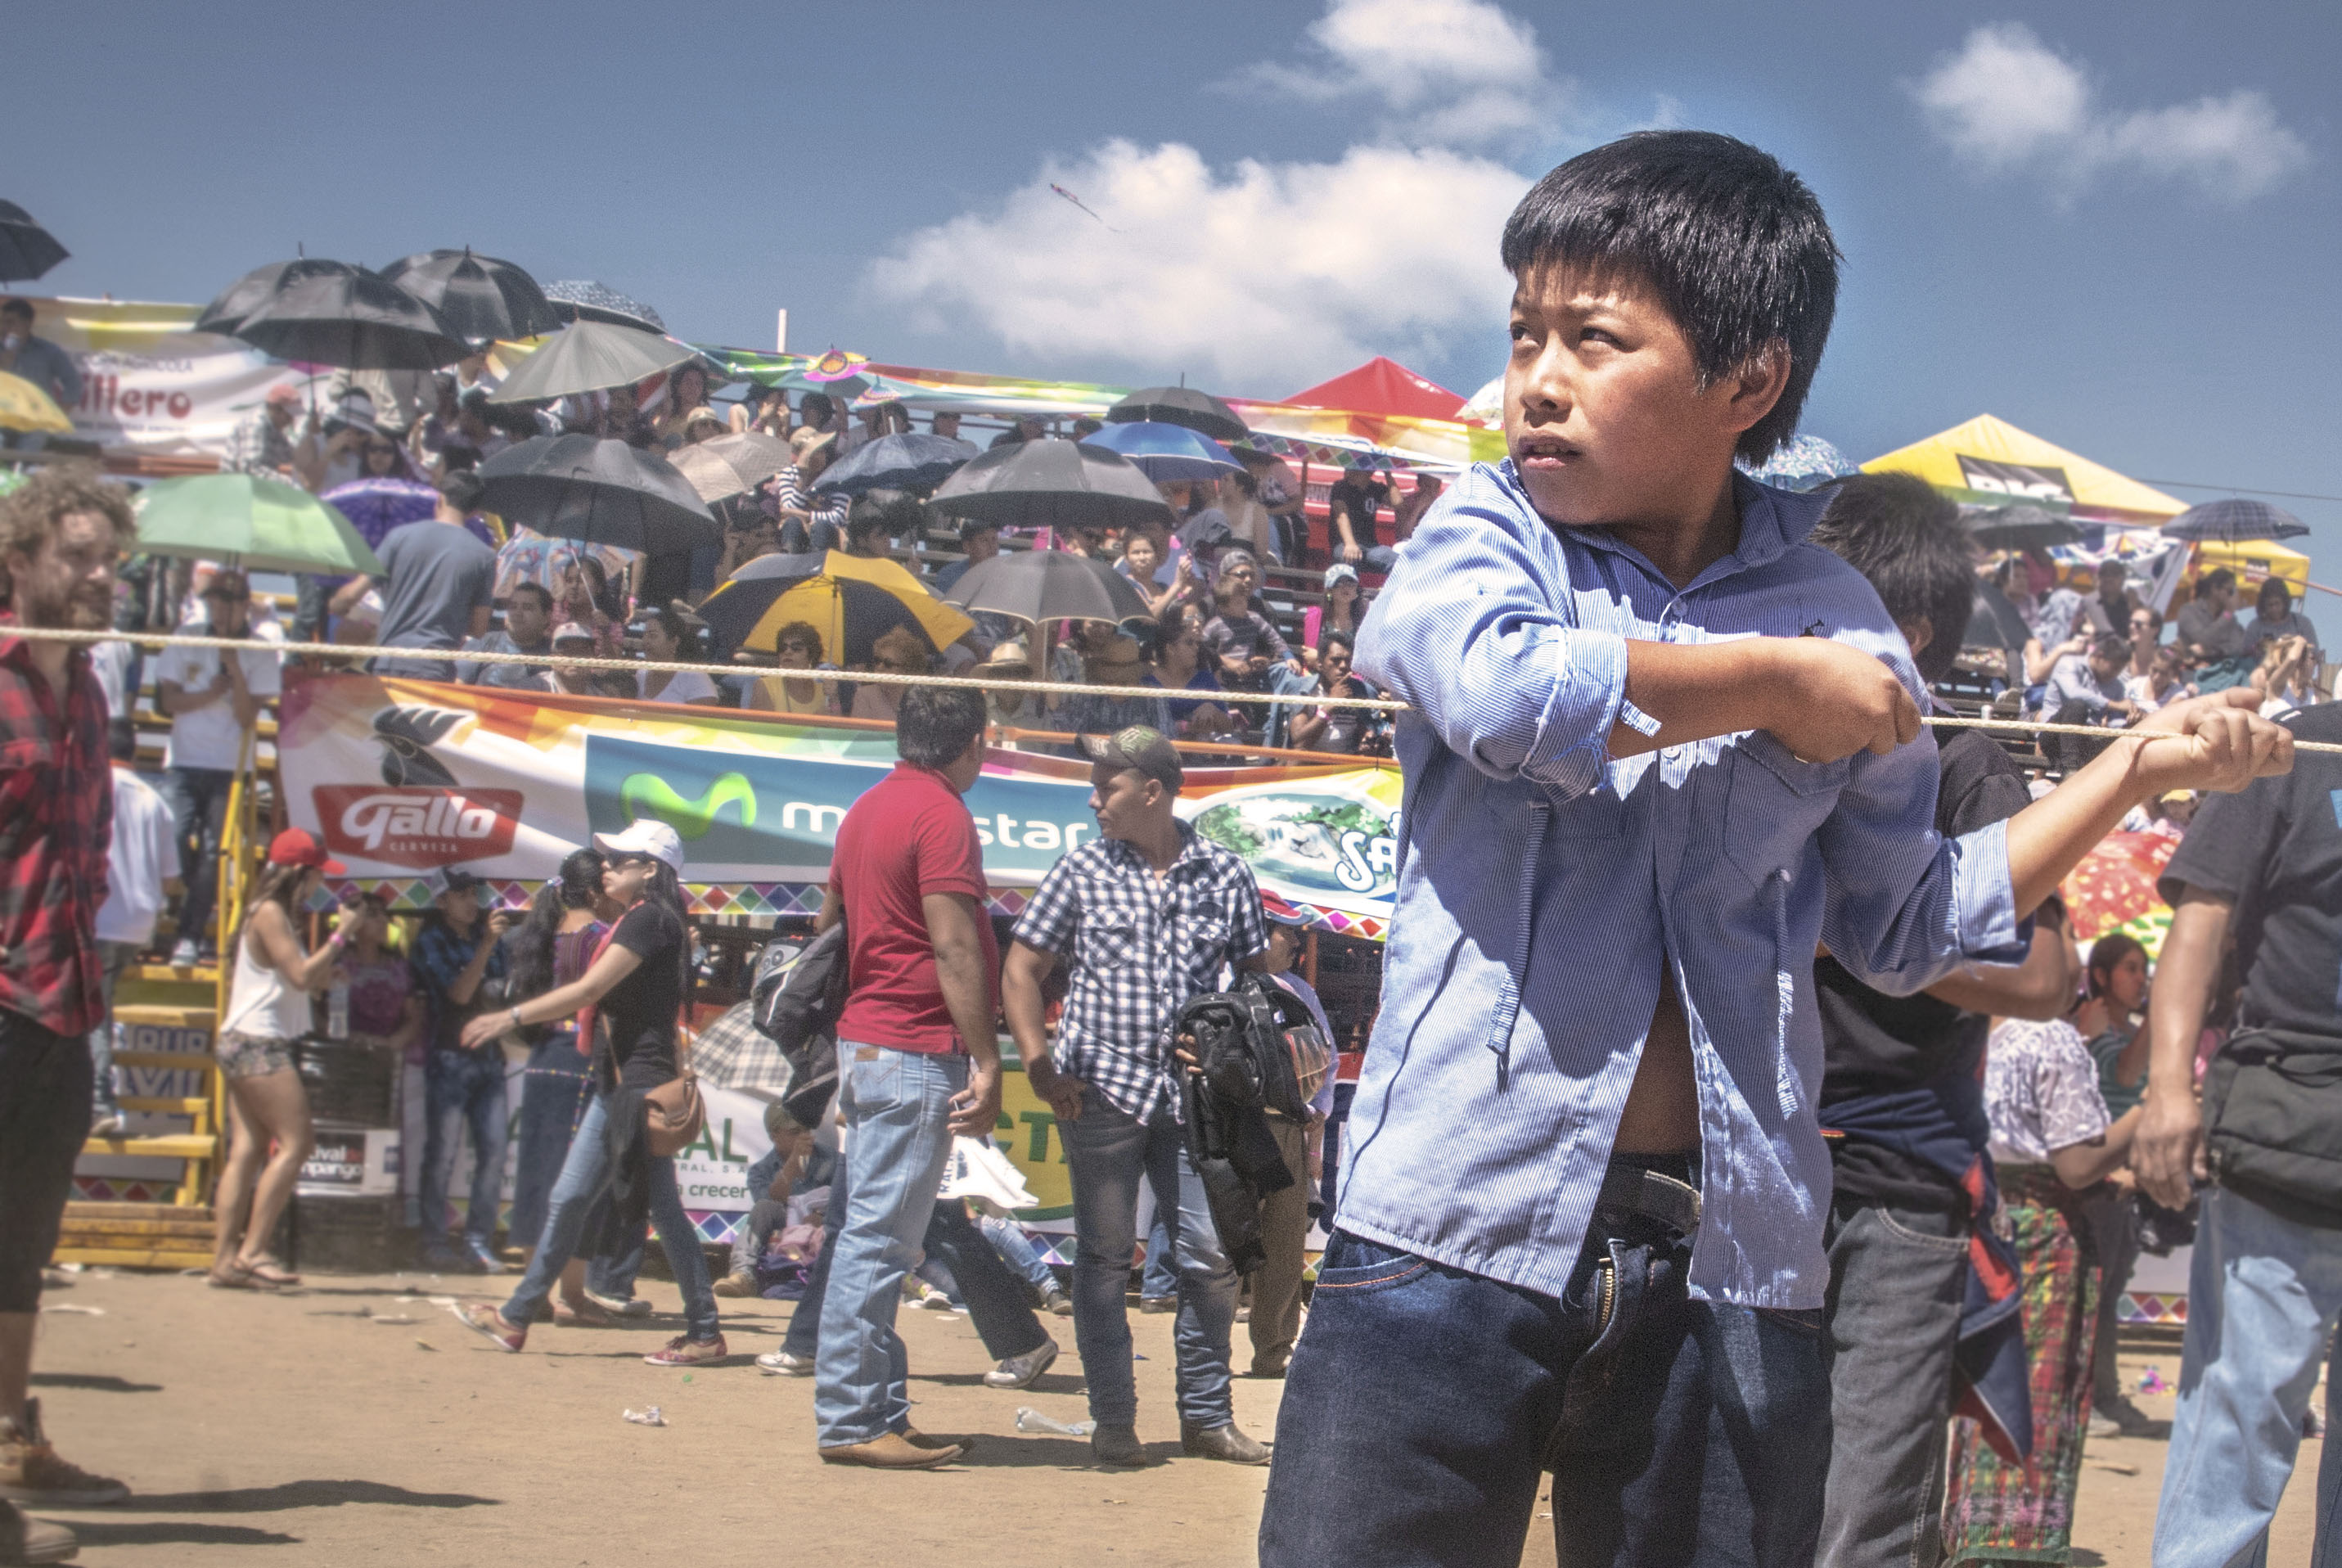 Kites are so large, they require teams of four or more children to break into the sky.  A young boy looks back to make sure his teammates are ready to run before giving the signal to launch.